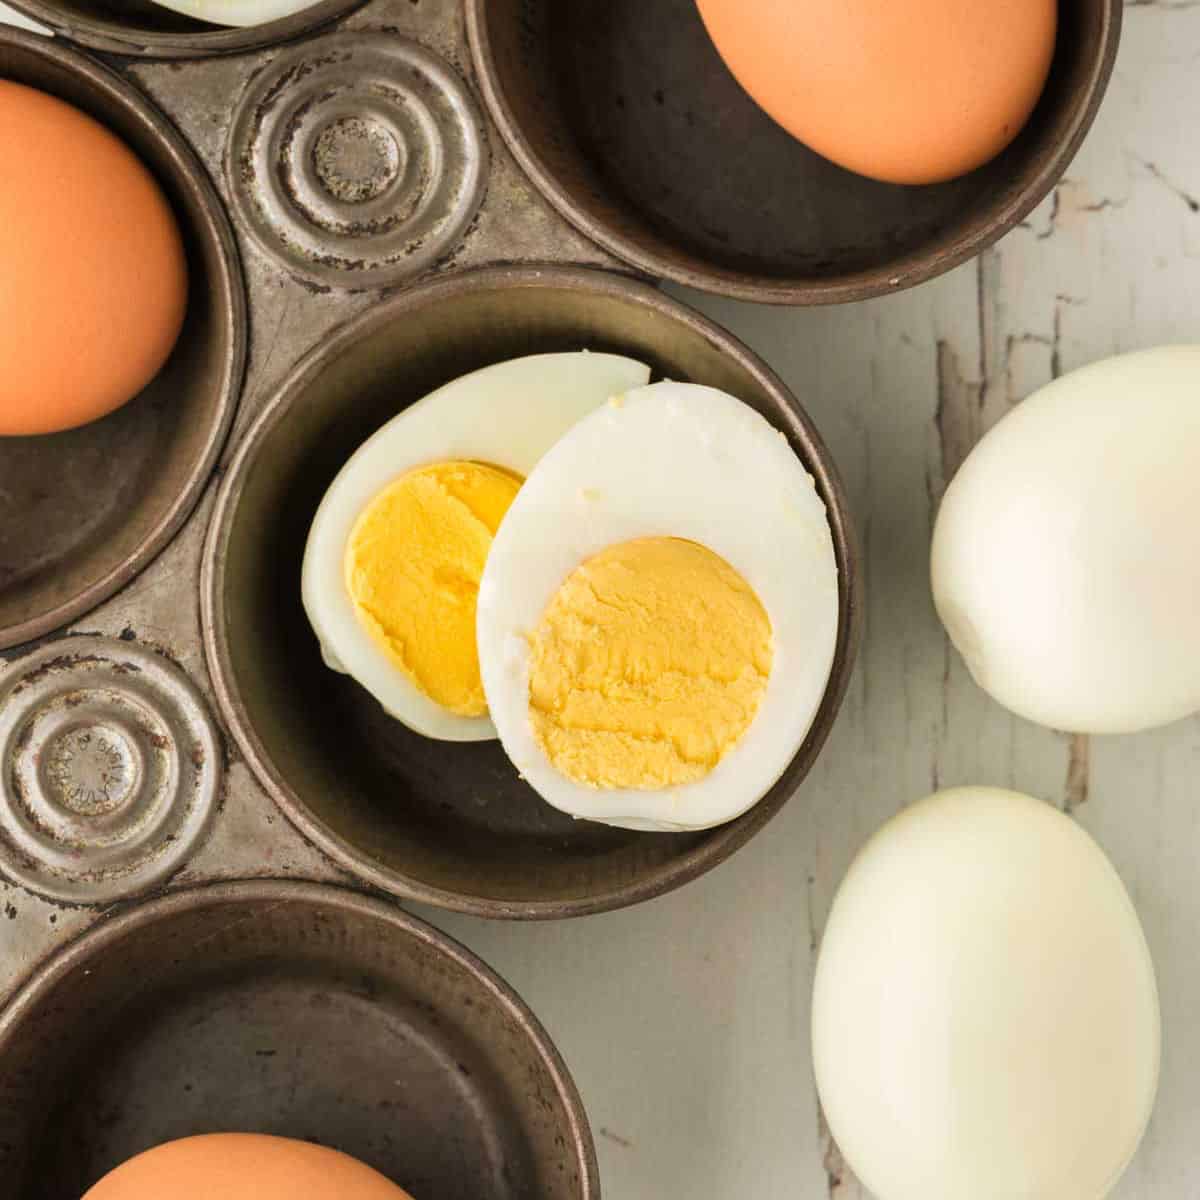 Easy To Peel Hard-Boiled Eggs Recipe and Nutrition - Eat This Much